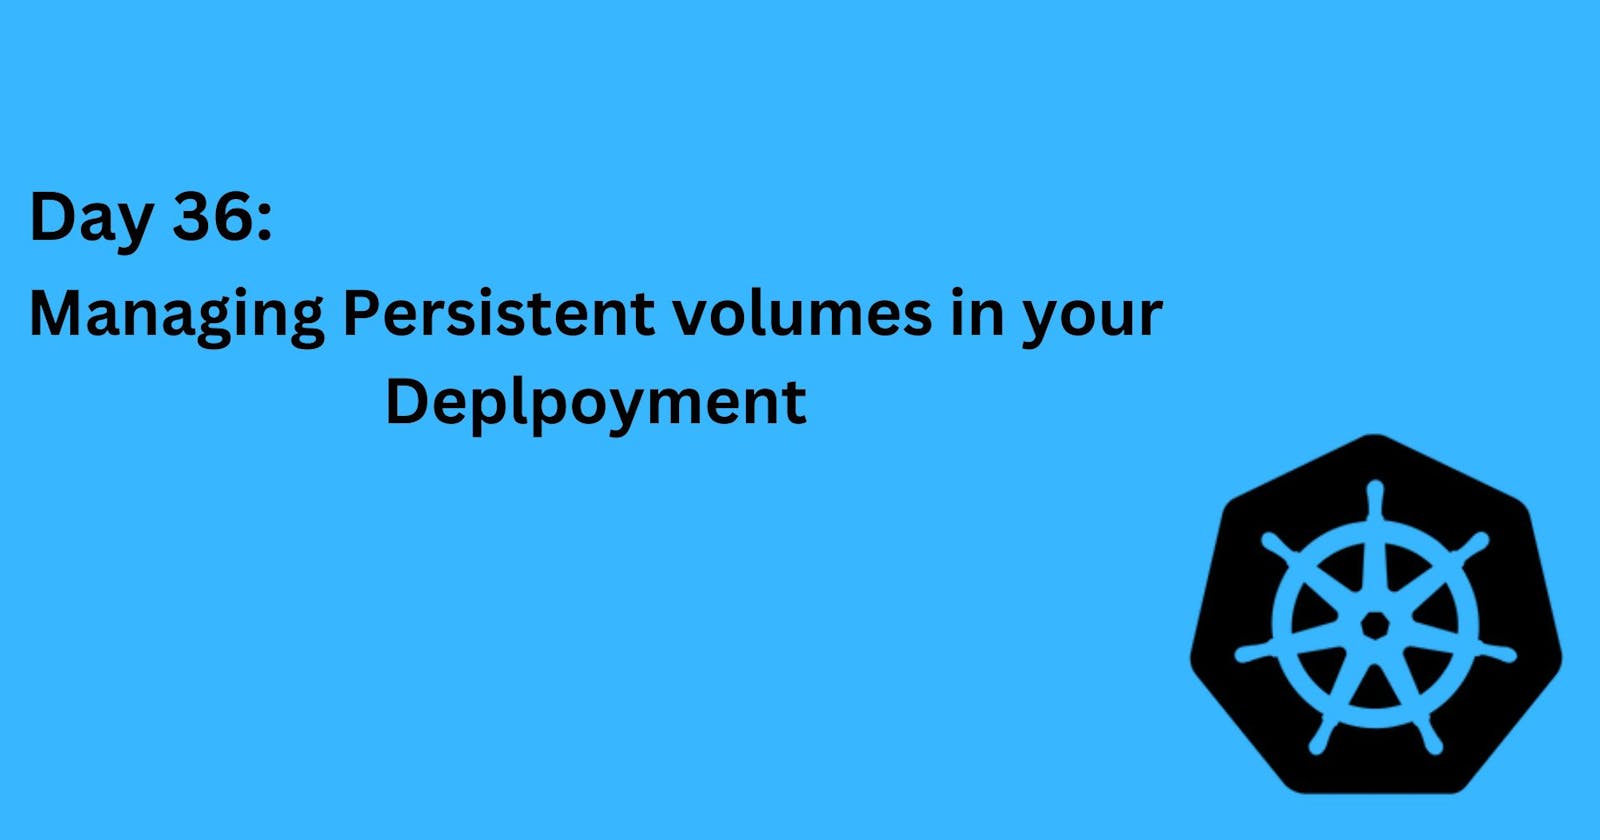 Day 36: Managing Persistent volumes in your Deplpoyment